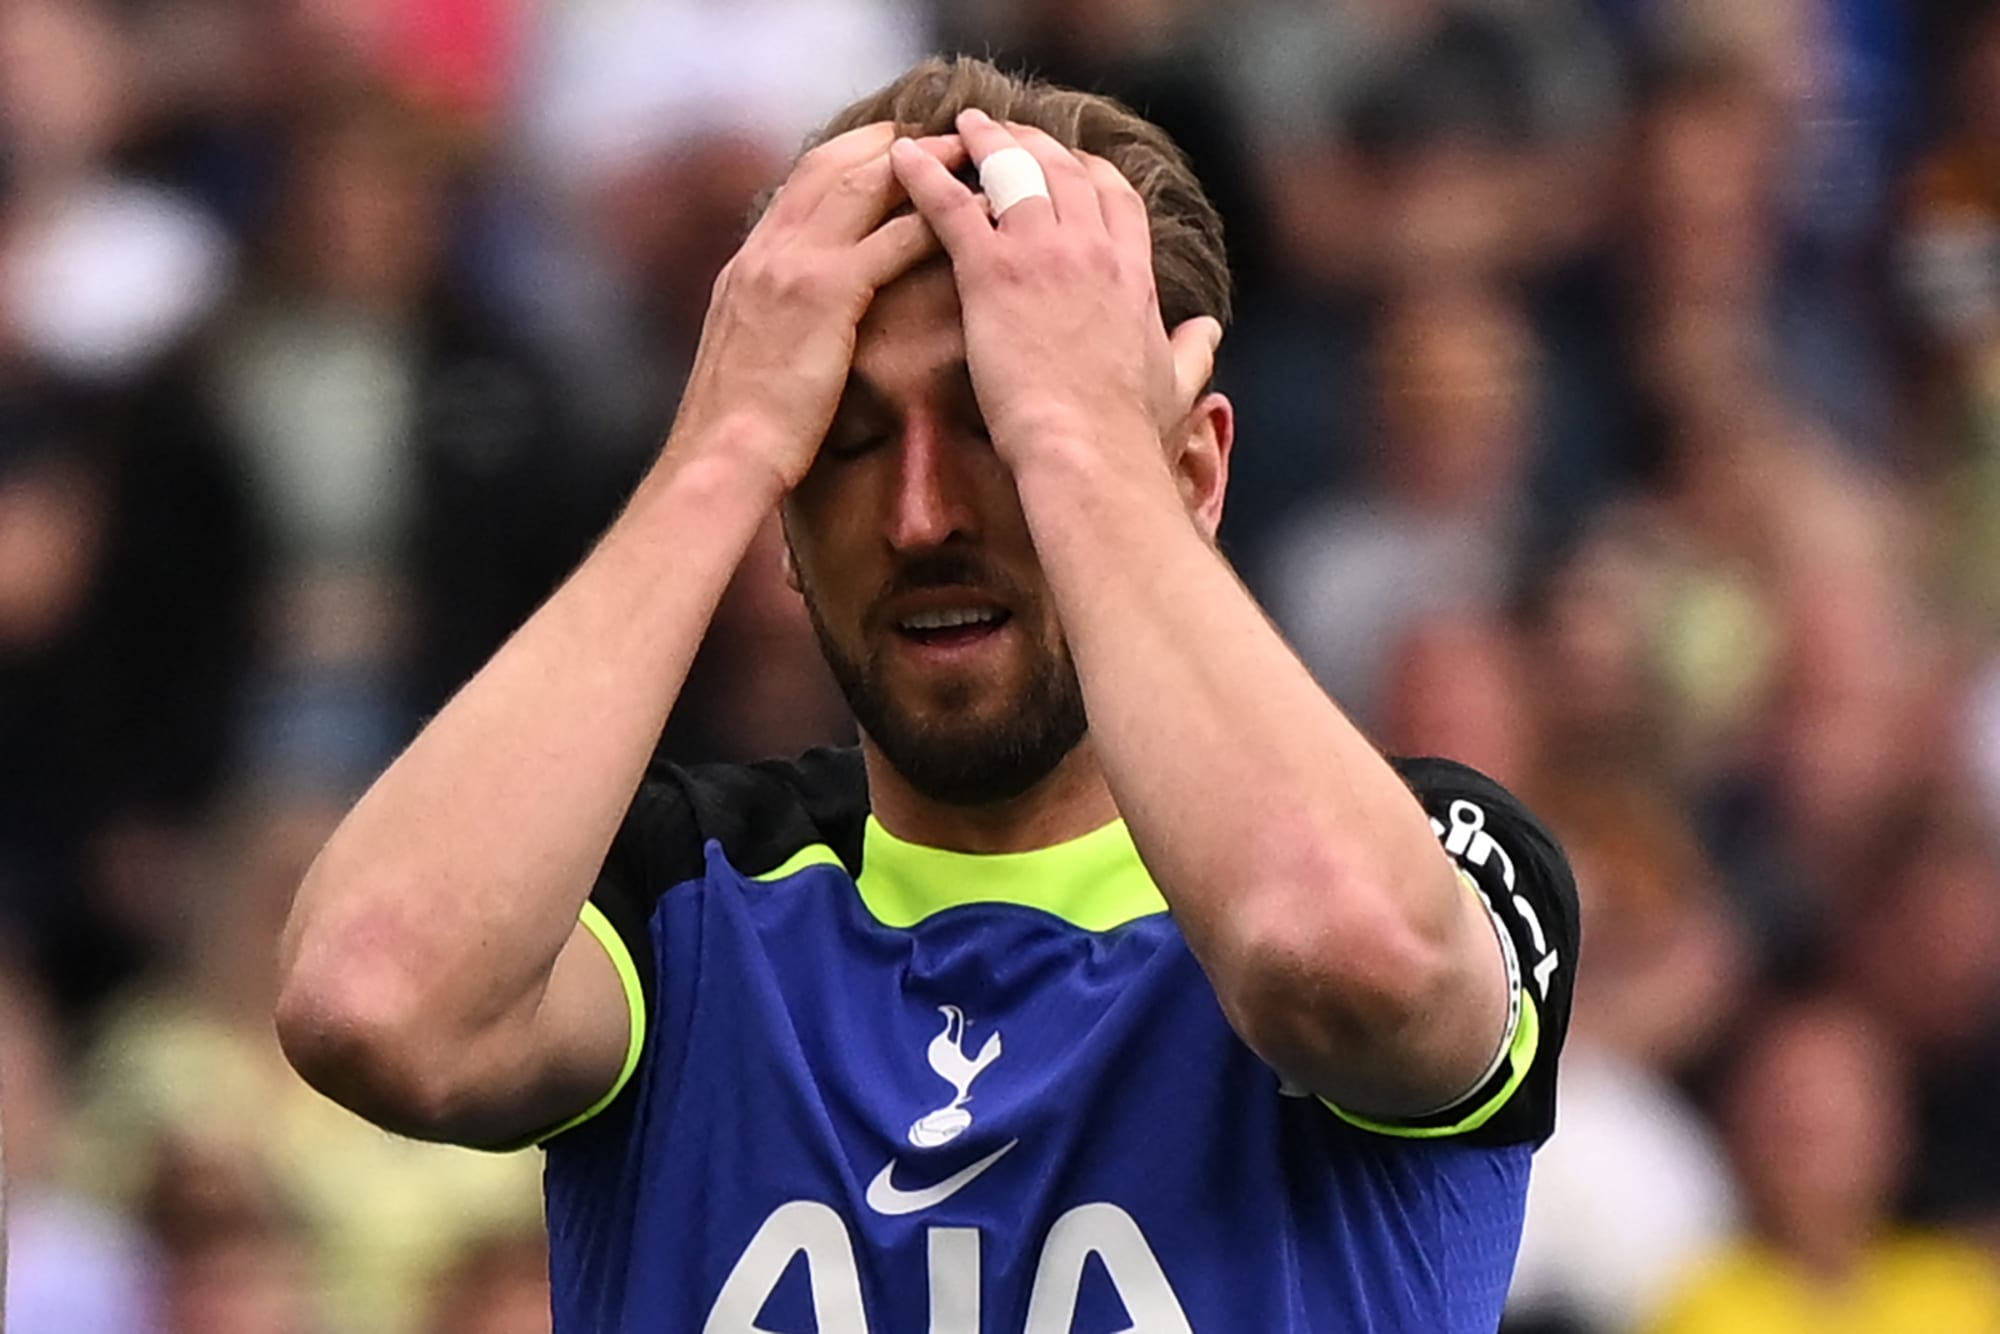 Tottenham’s Harry Kane leaving for Real Madrid, reports speculate